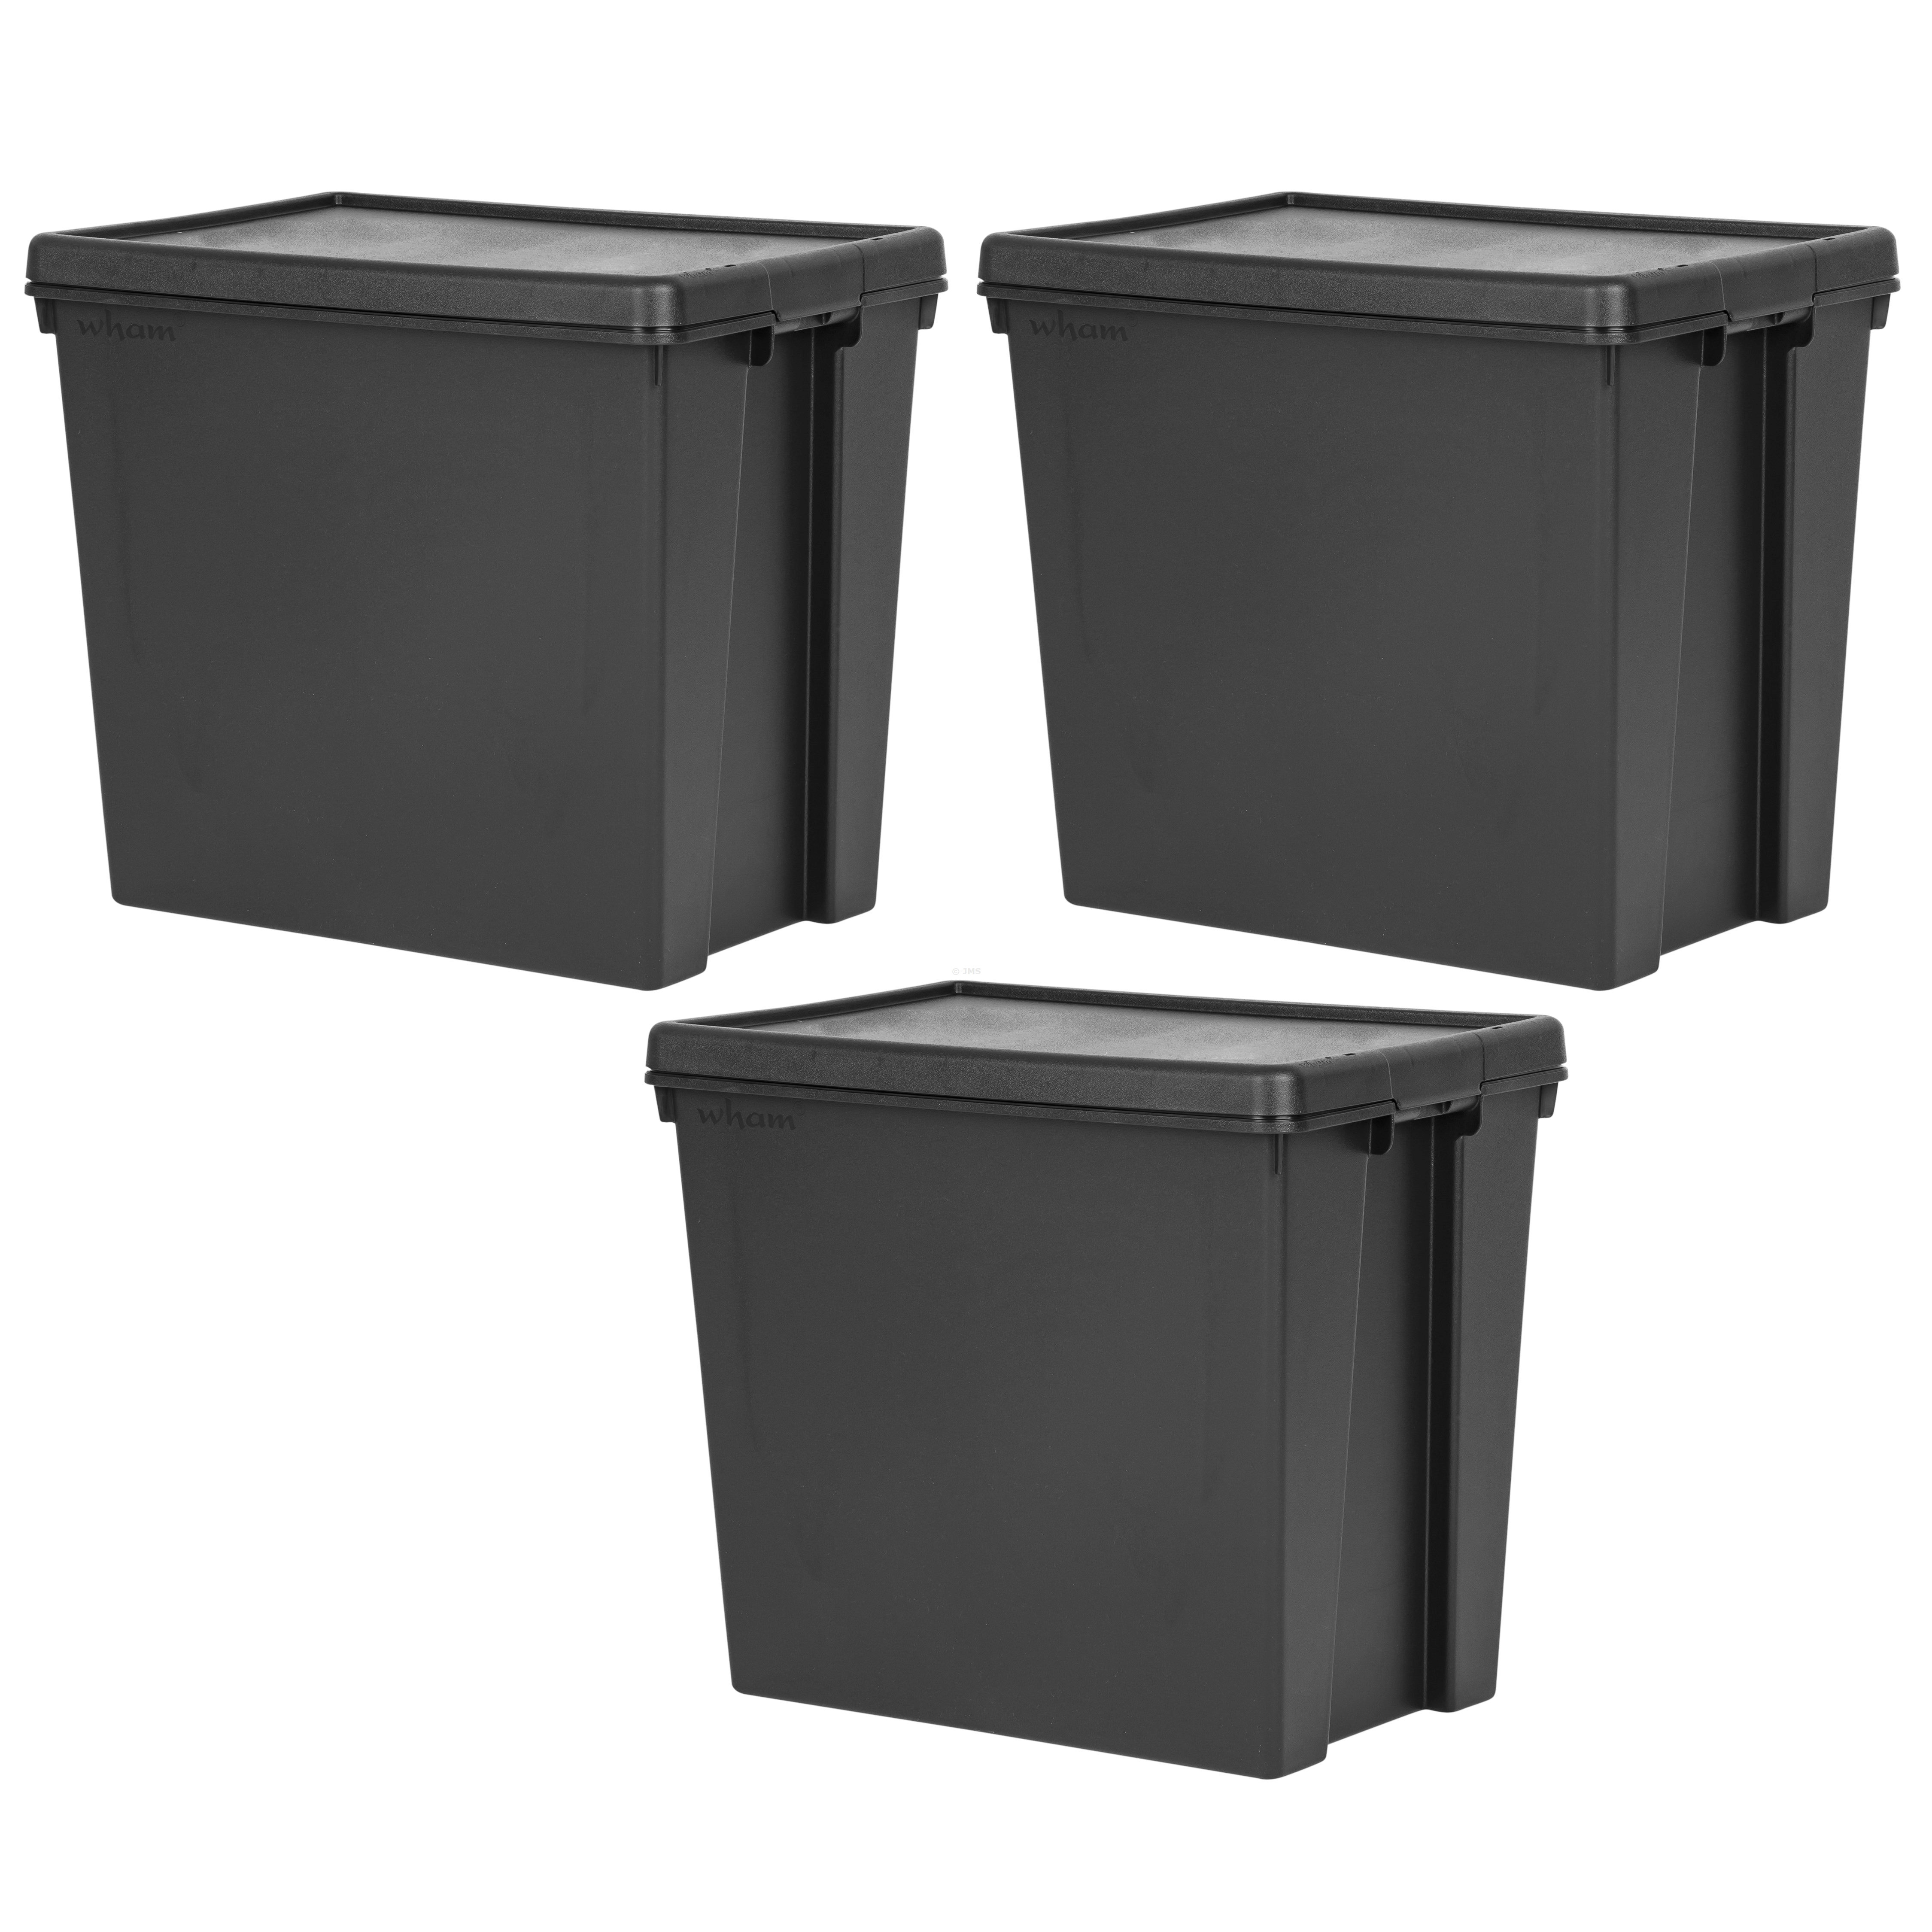 [Set of 3] 92L Black Stackable Storage Box with Lid Heavy Duty Recycled Plastic Nestable Container Boxes Home Office Garage Toolbox